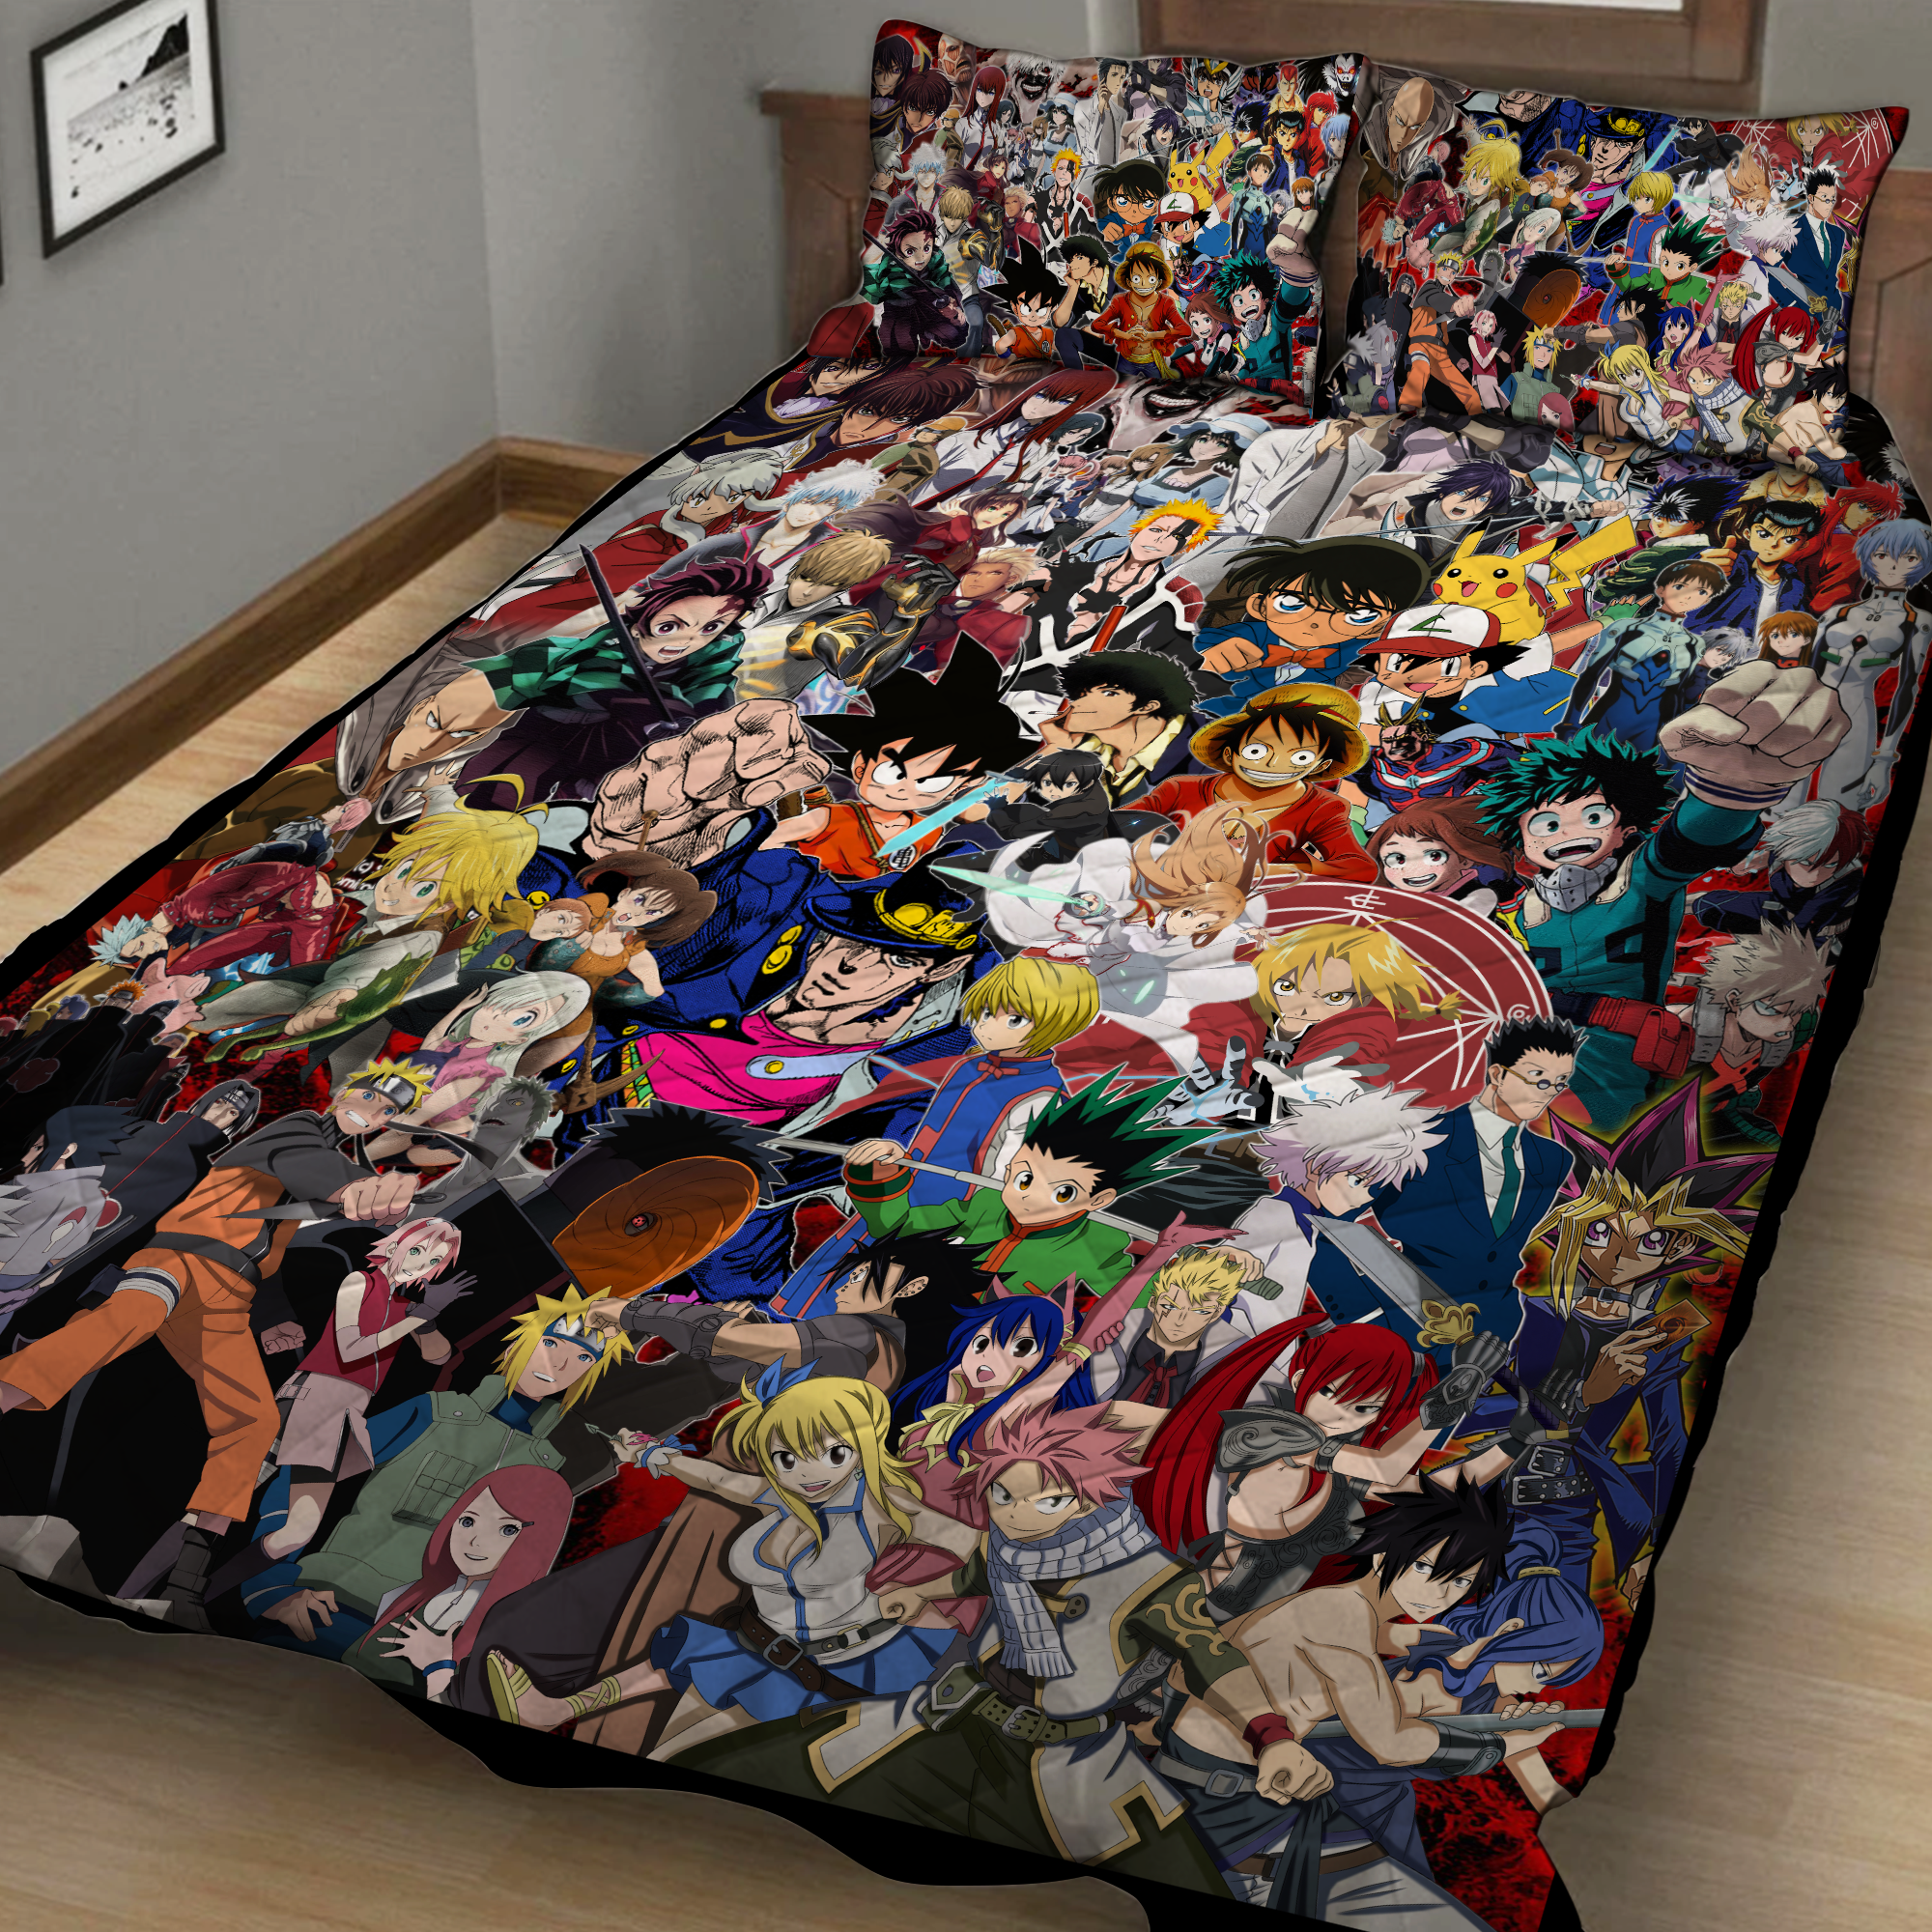 Anime Characters Complication (Dragon Ball, Naruto, One Piece, Bleach, Yu Gi Oh!, My hero academia, Pokemon, The metal Alchemist, ect.) 3D Quilt Bed Set